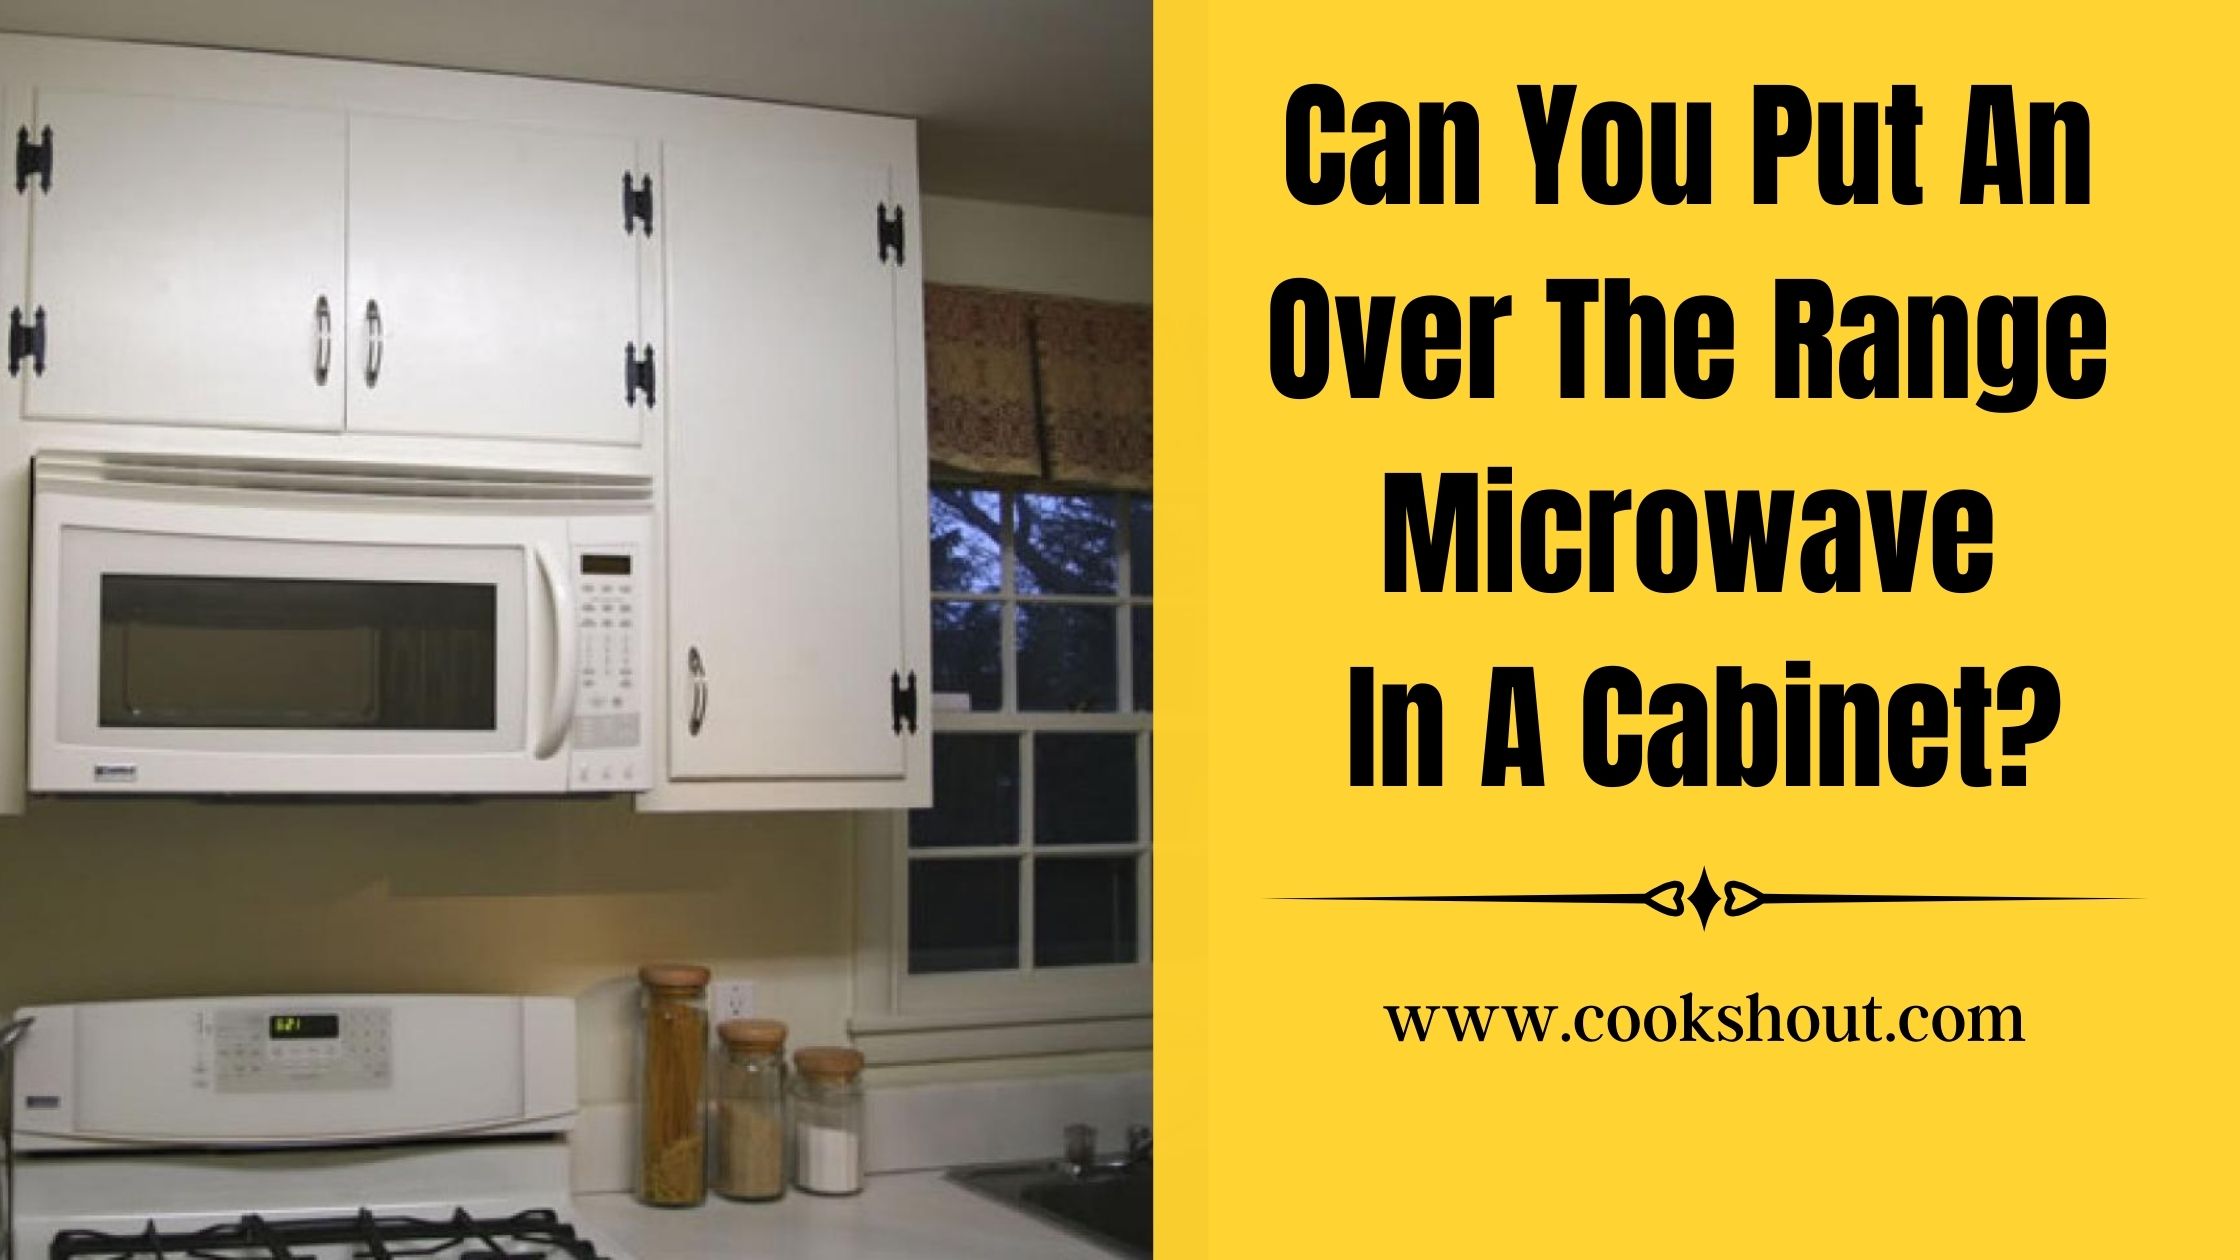 Can You Put An Over The Range Microwave In A Cabinet